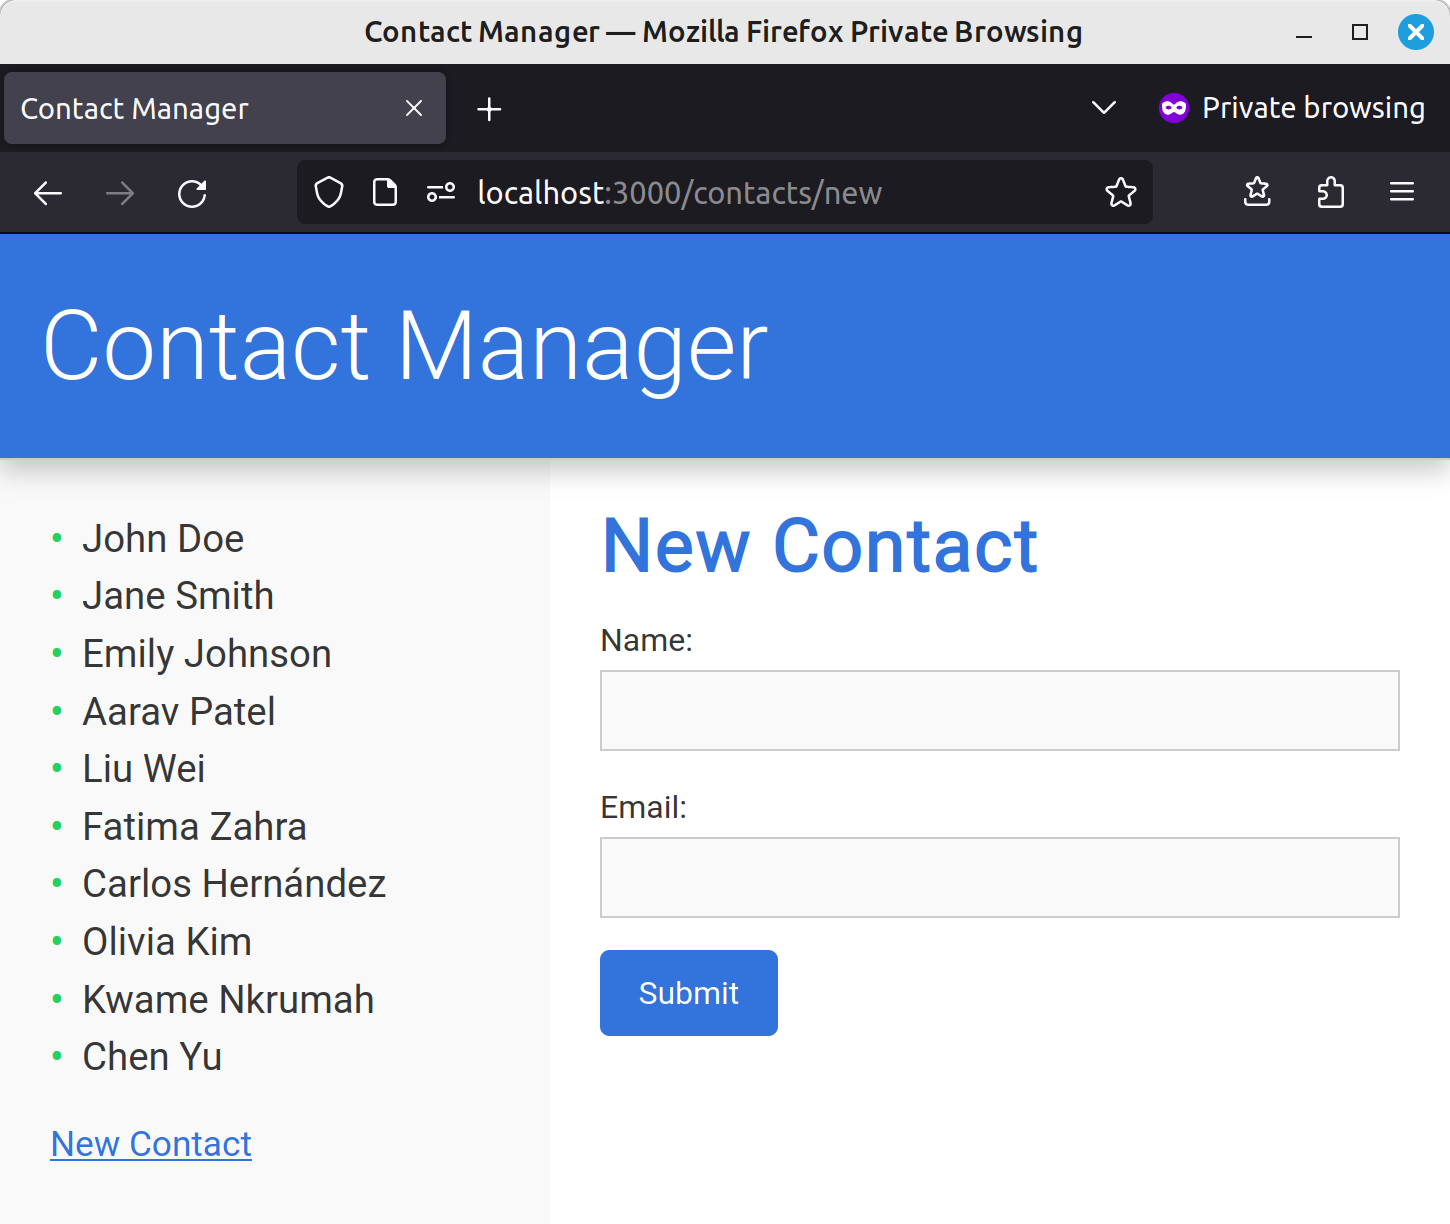 The New Contact form